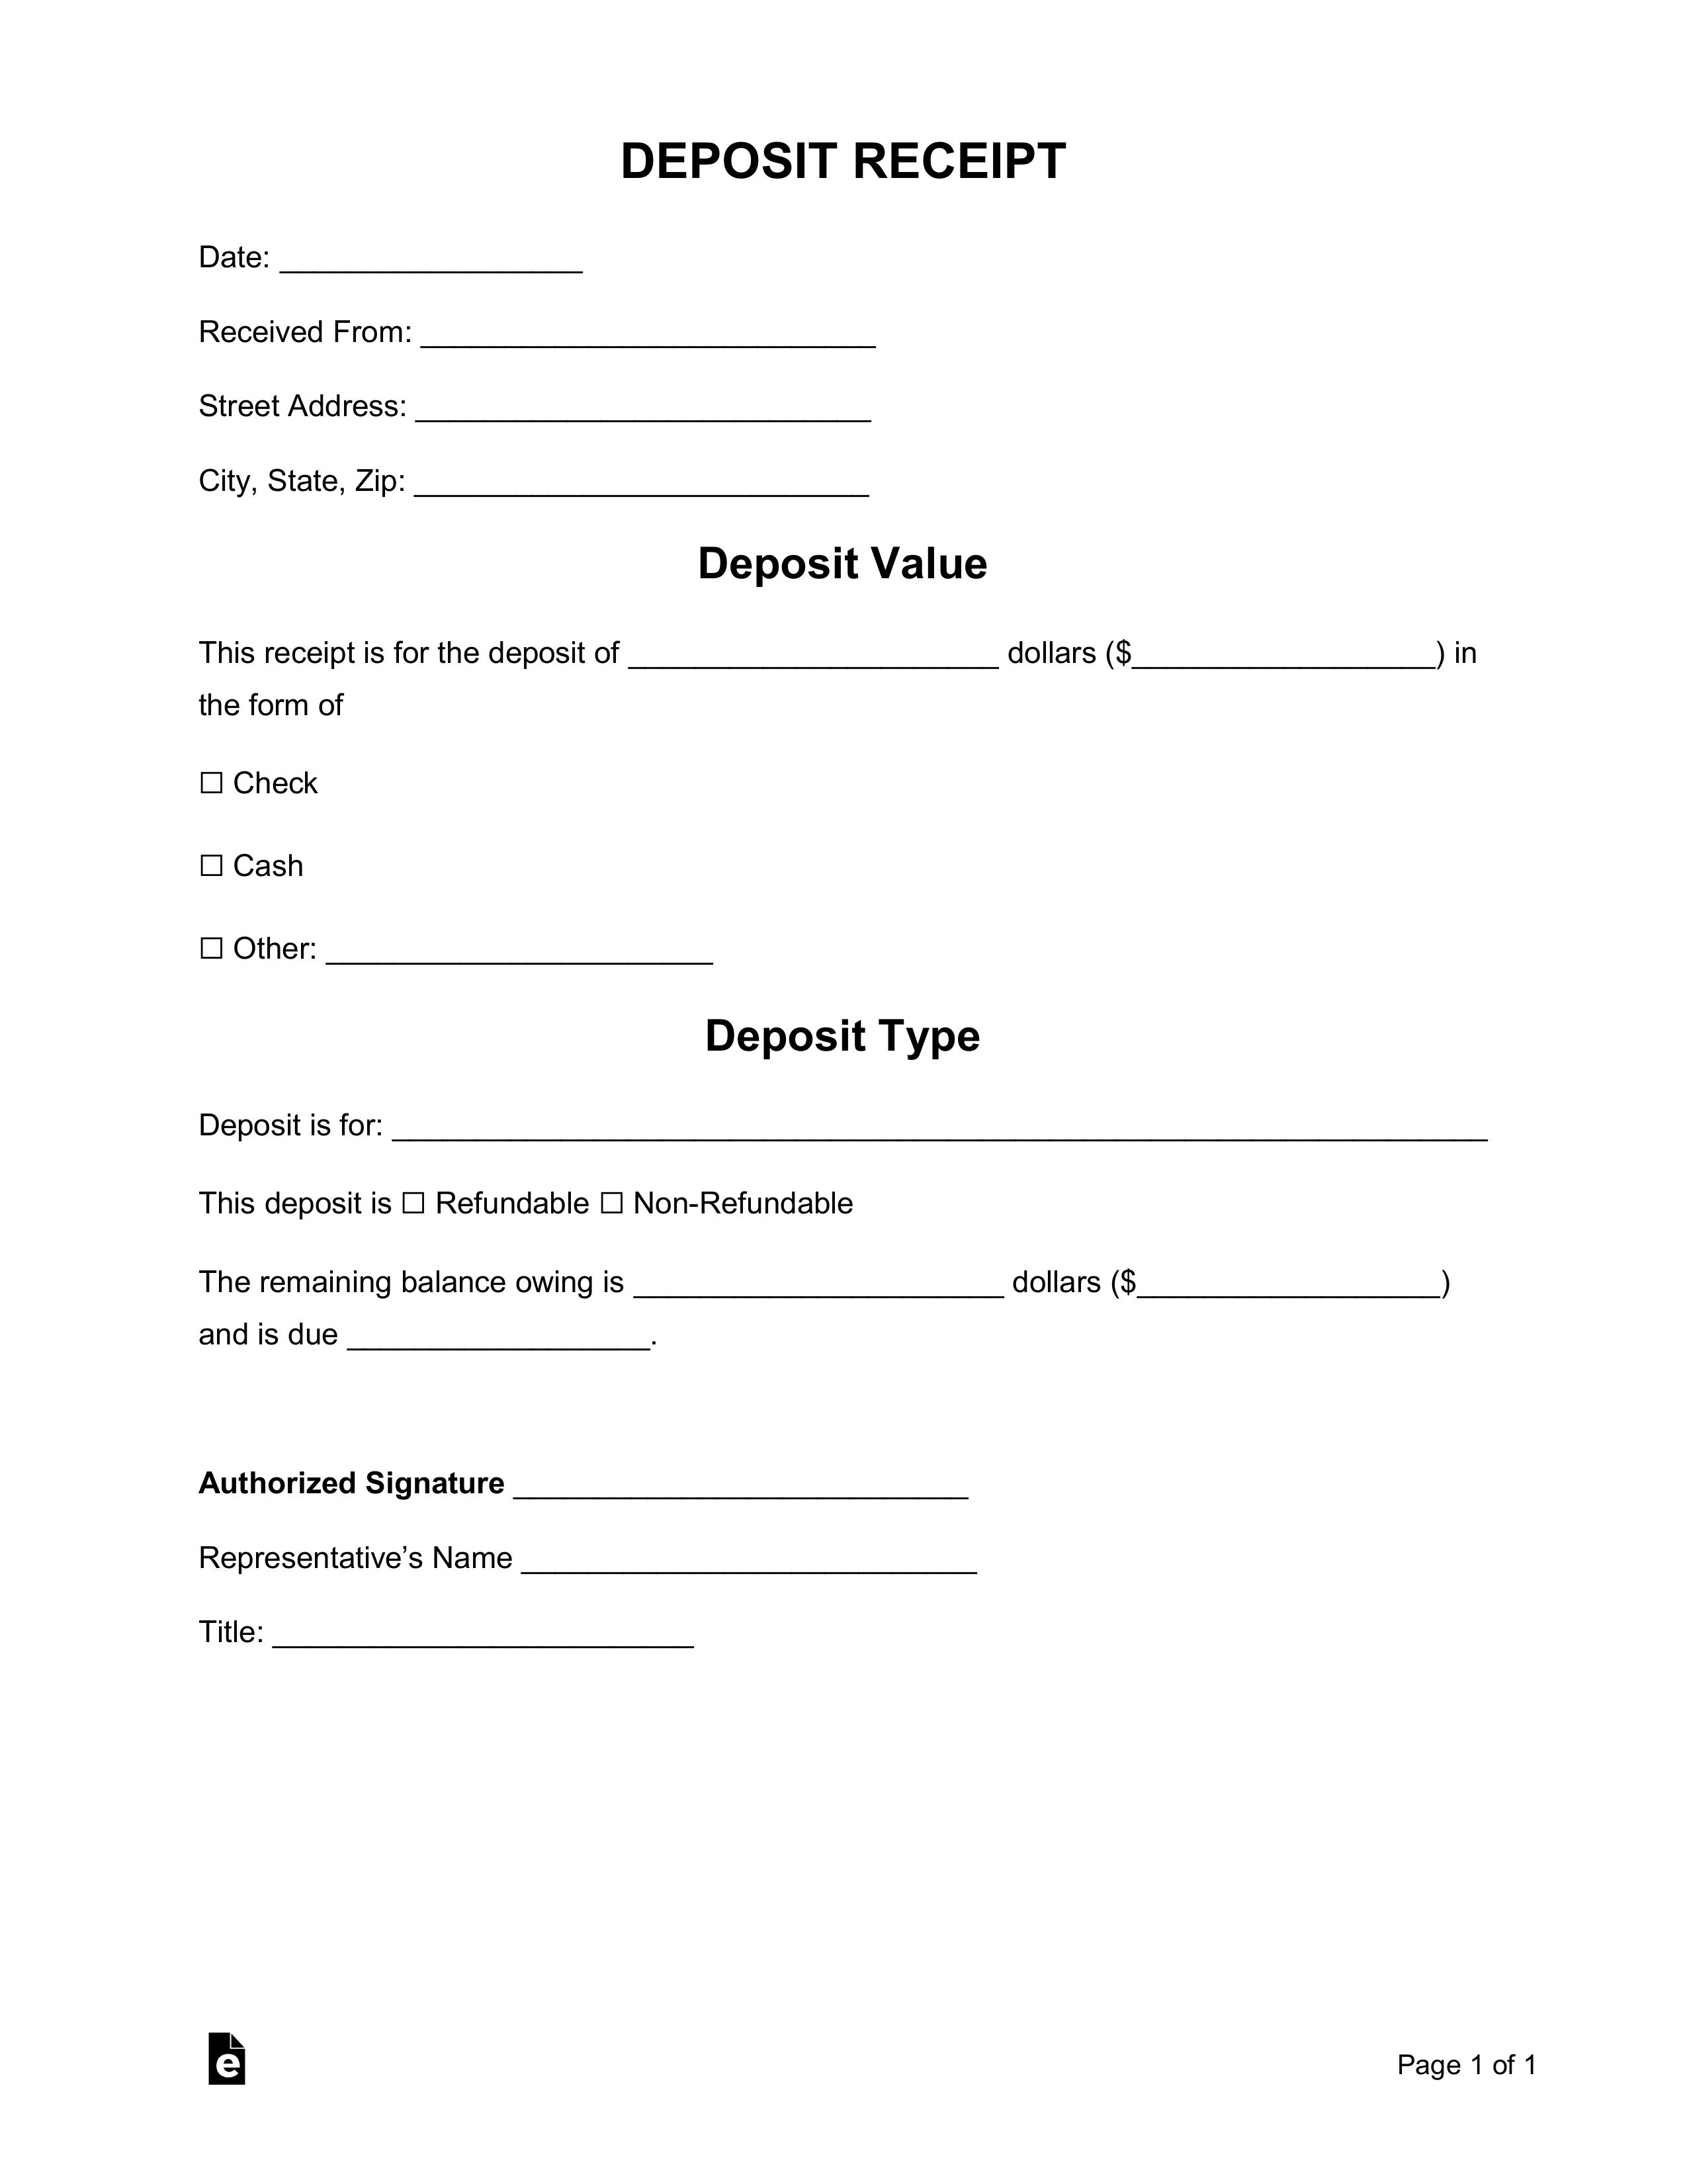 Free Deposit Receipt Templates – Word  PDF – EForms With Regard To Non Refundable Deposit Form Template